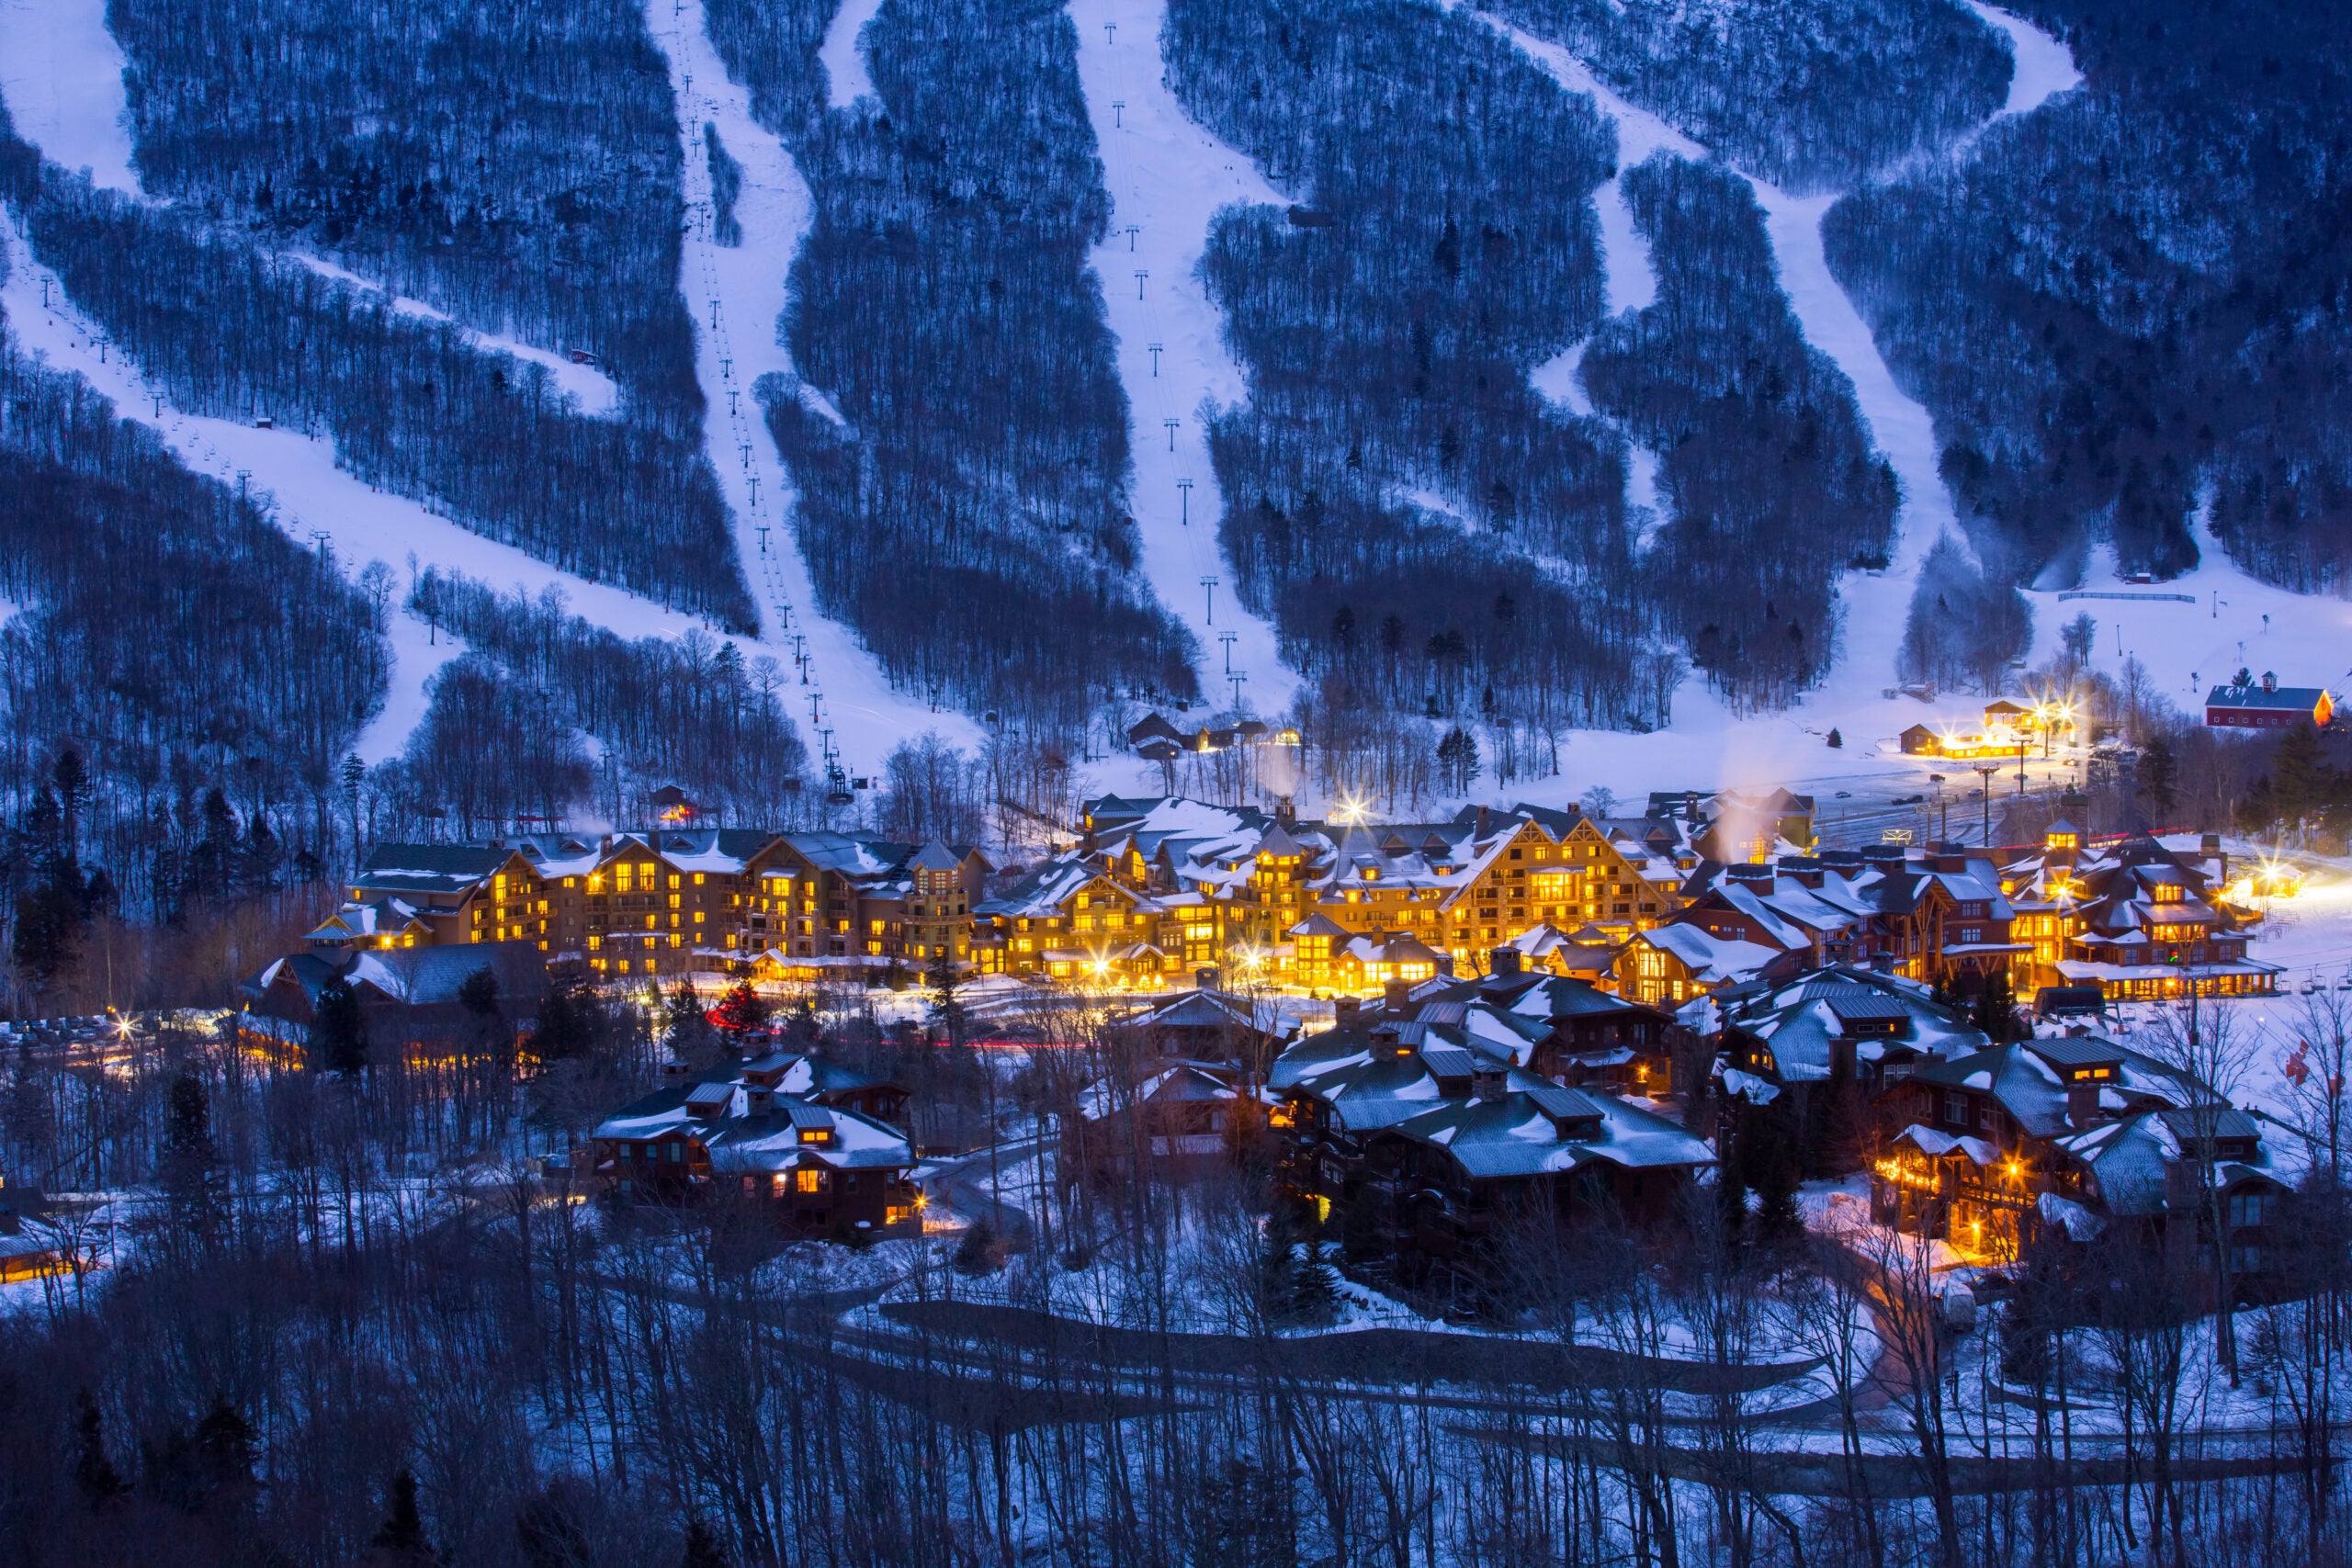 17 of the best ski towns in the US